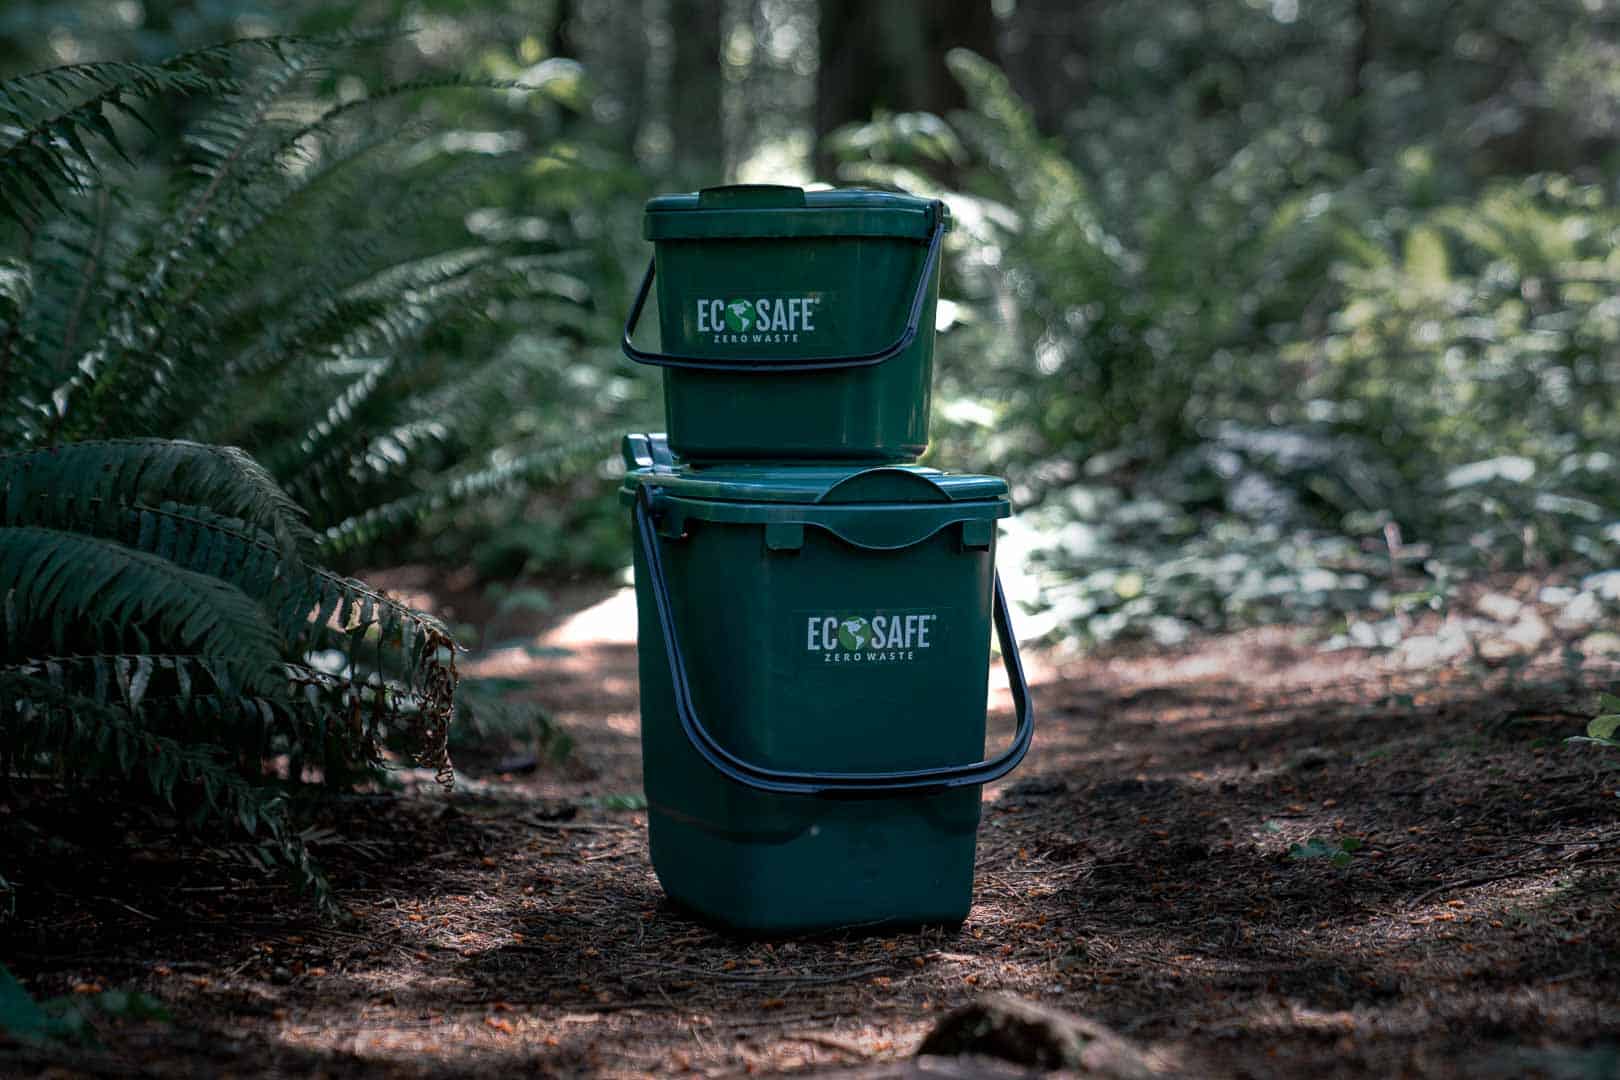 EcoSafe compost bins in a forest